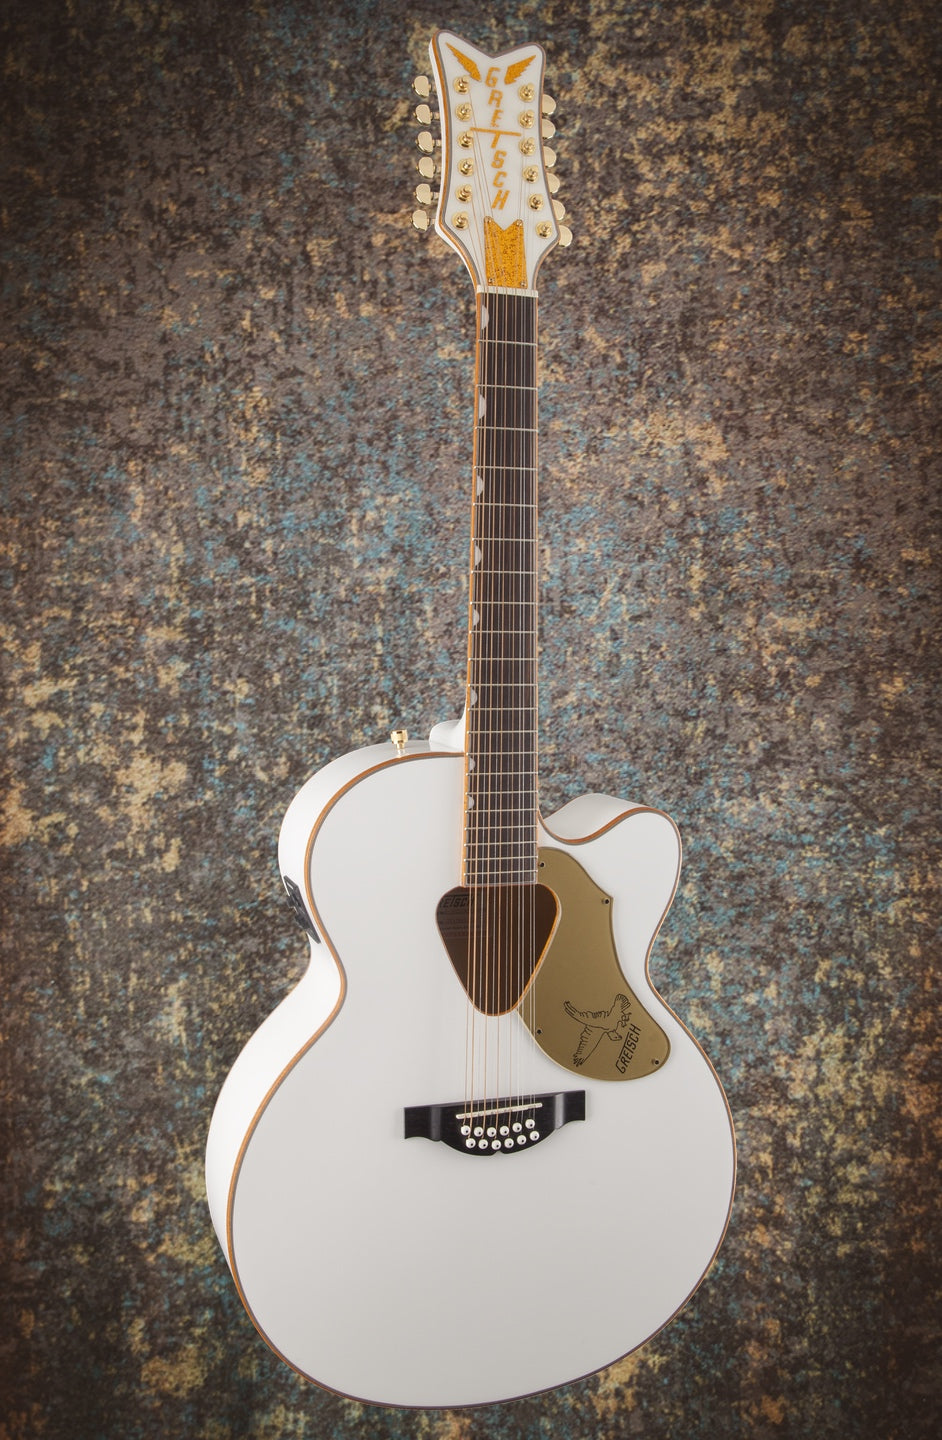 G5022CWFE-12 RANCHER™ FALCON™ ACOUSTIC / ELECTRIC 12-STRING - WHITE